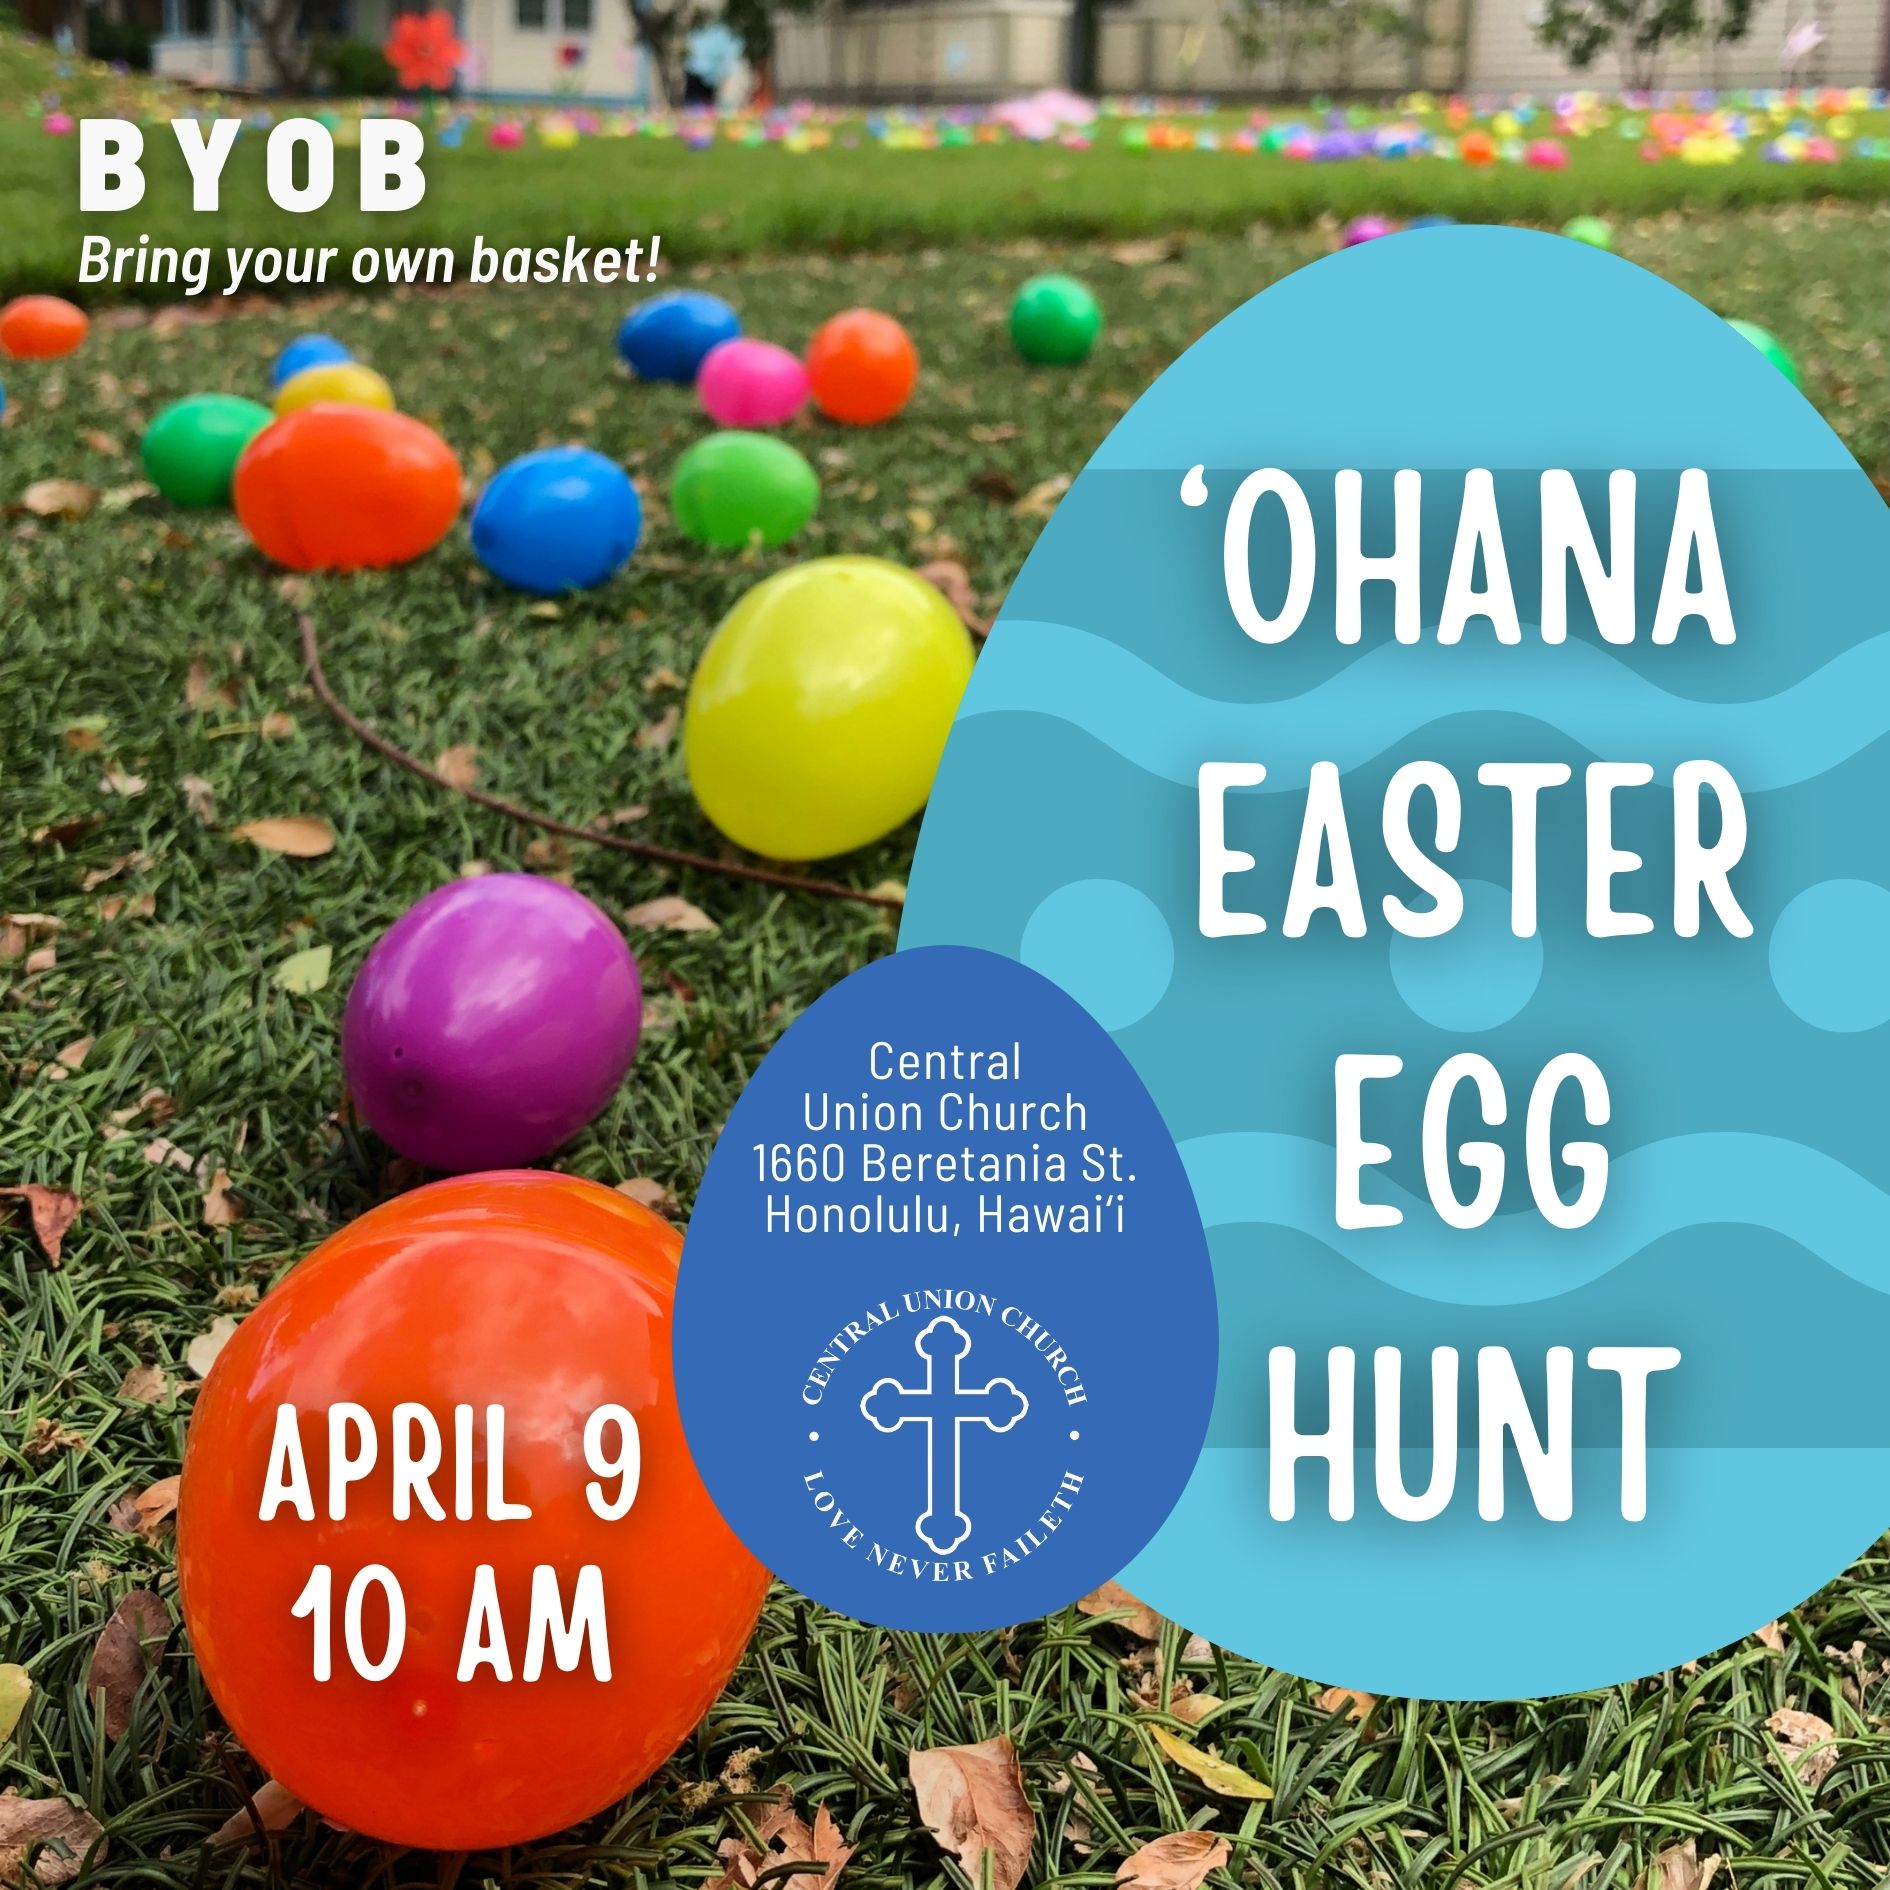 ohana easter egg hunt on april 9 at 10am at central union church